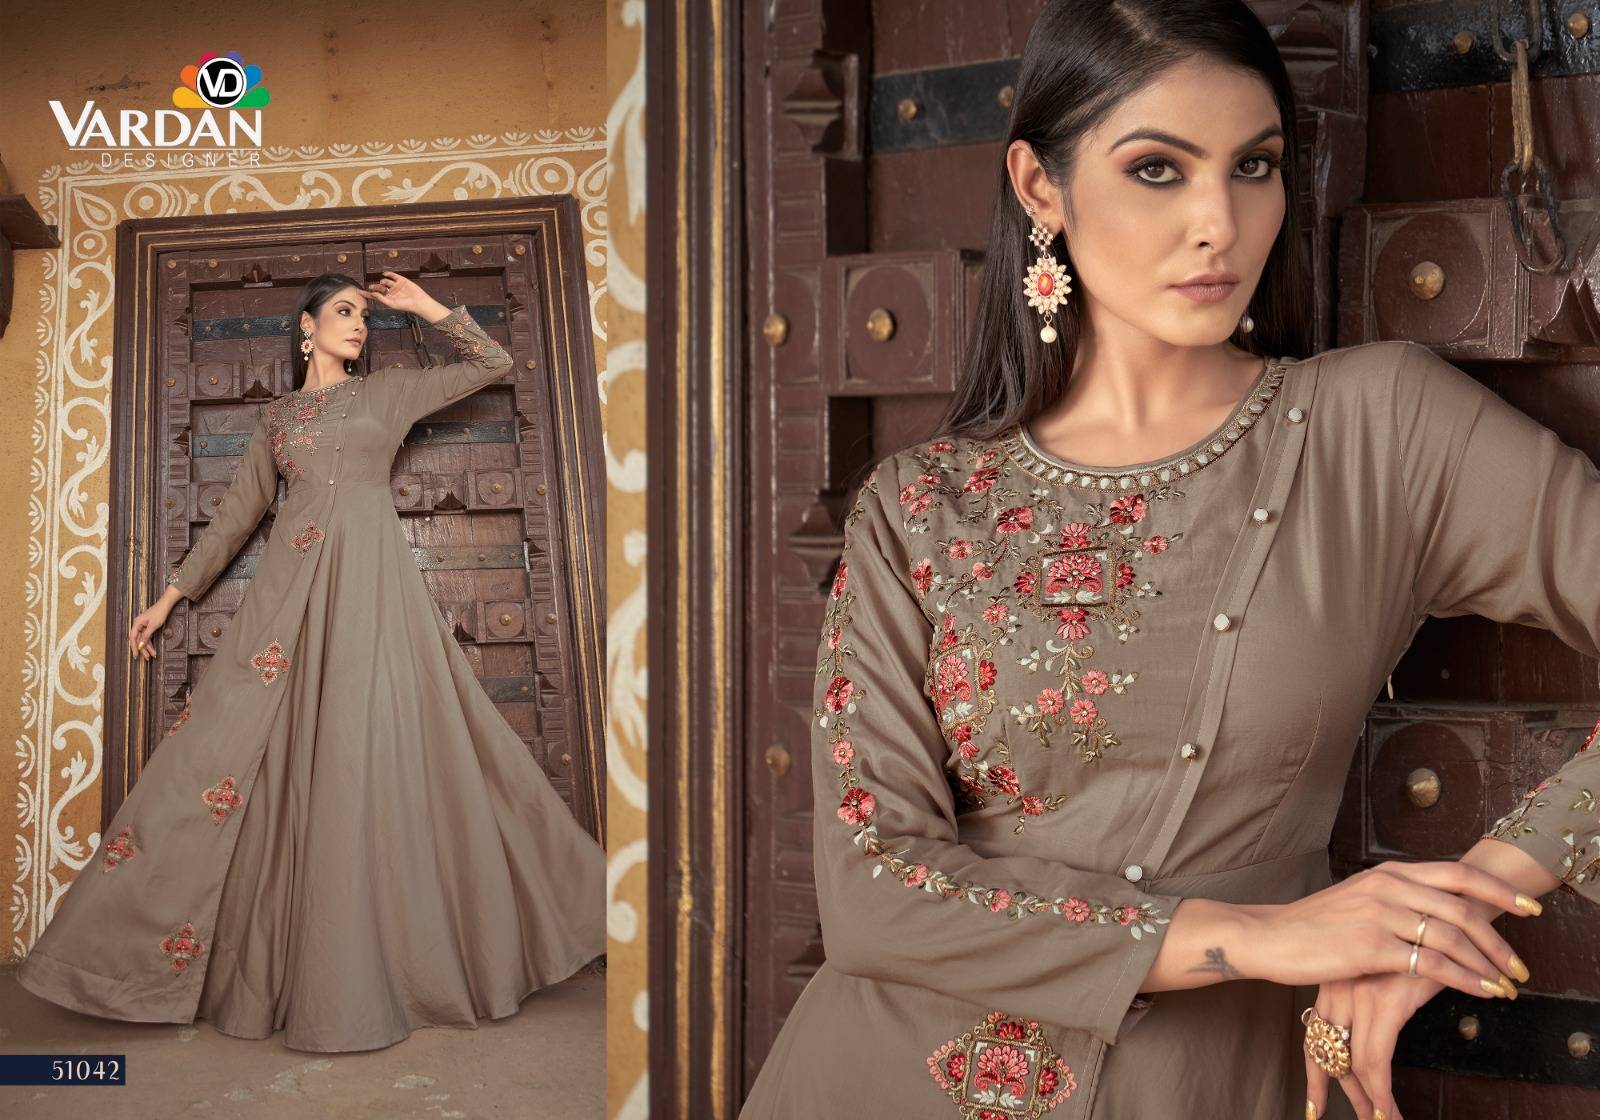 Sara Vol-1 By Vardan Designer 51041 To 51044 Series Beautiful Stylish Fancy Colorful Casual Wear & Ethnic Wear Heavy Muslin Gowns At Wholesale Price